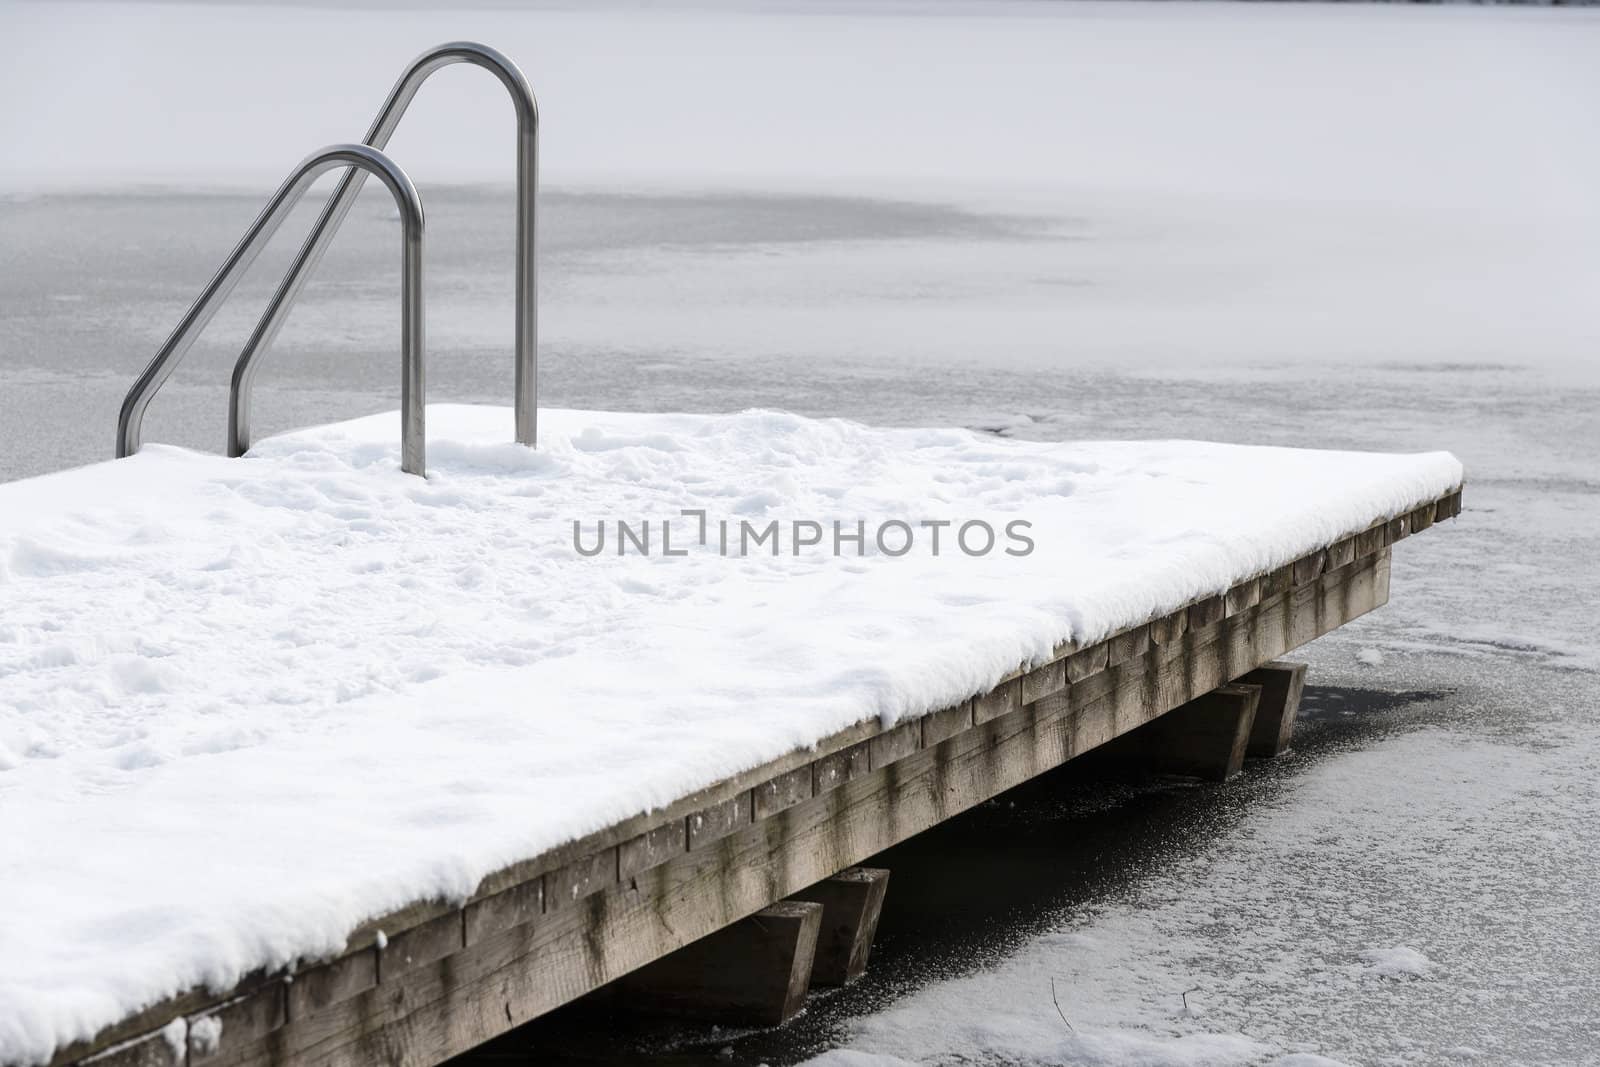 Pool ladder on a frozen lake with snow and ice